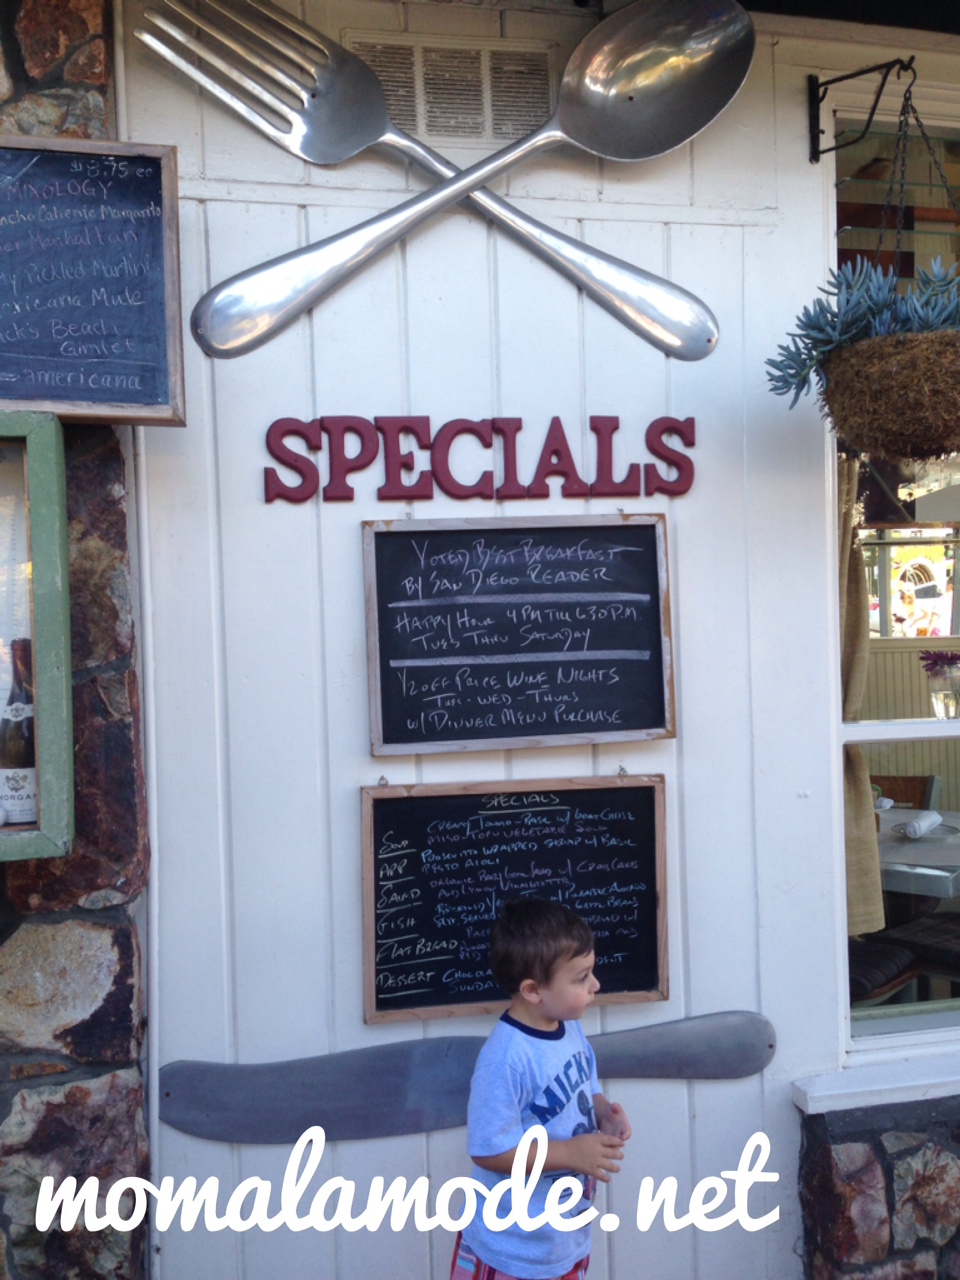 Roc checking out the specials outside of Americana in Del Mar, CA